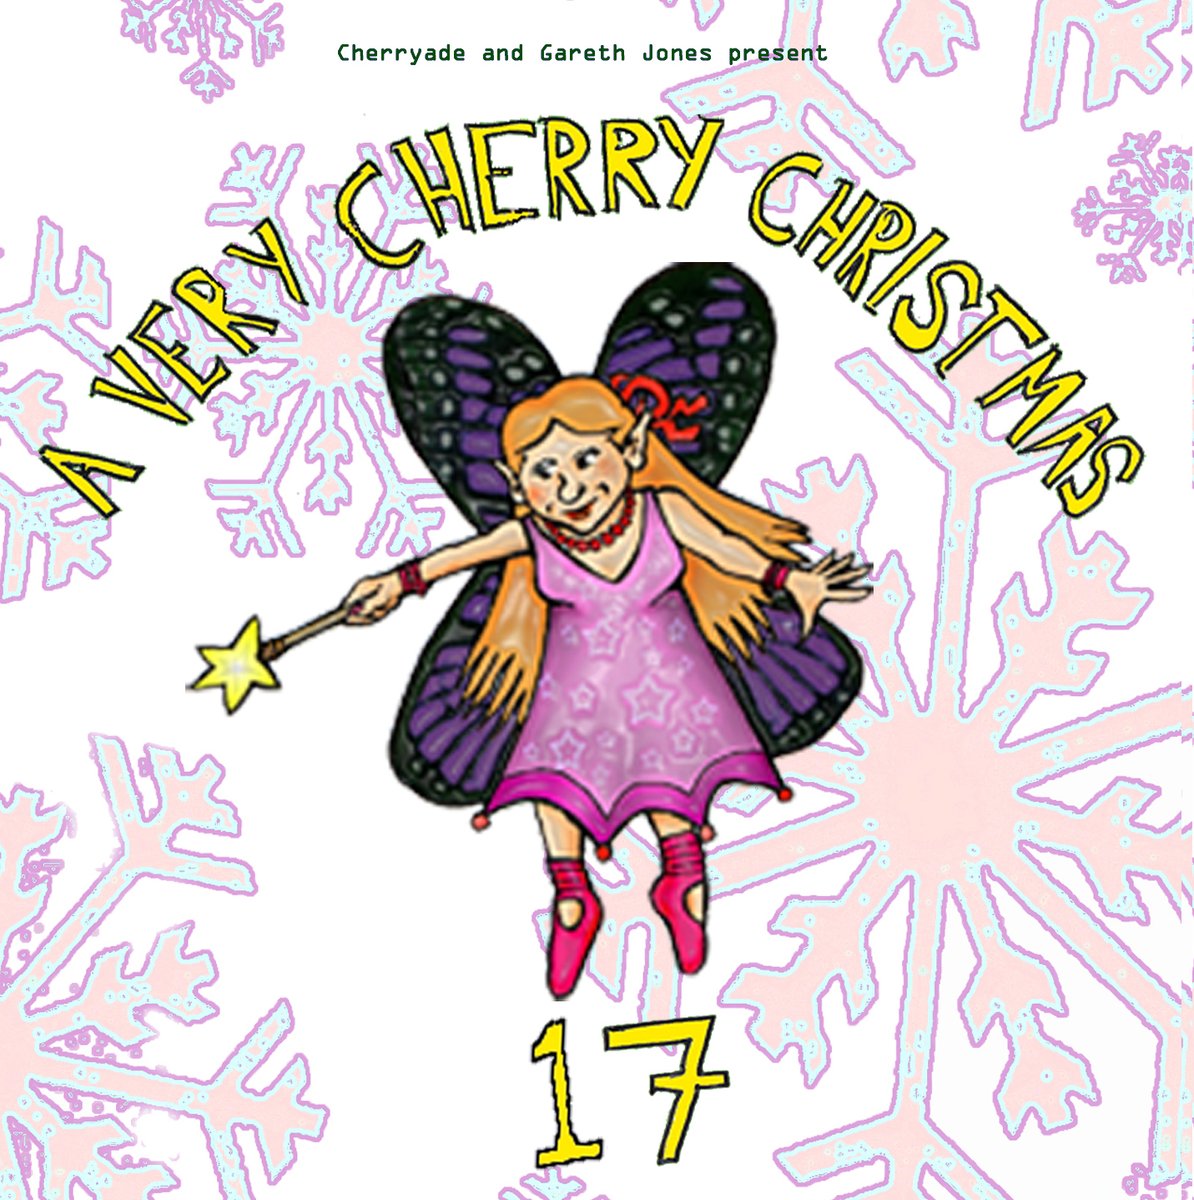 Flying the indie #christmas flag for the 17th time, Cherryade Records' A Very Cherry Christmas 17 is now officially out! (thanks @Garethgoape!) - Featuring @probpatterns, @ToyDiscoMusic, @GdJeremiah + many more! A Very Cherry Christmas 17 (2023) christmasunderground.com/2023/11/17/a-v…